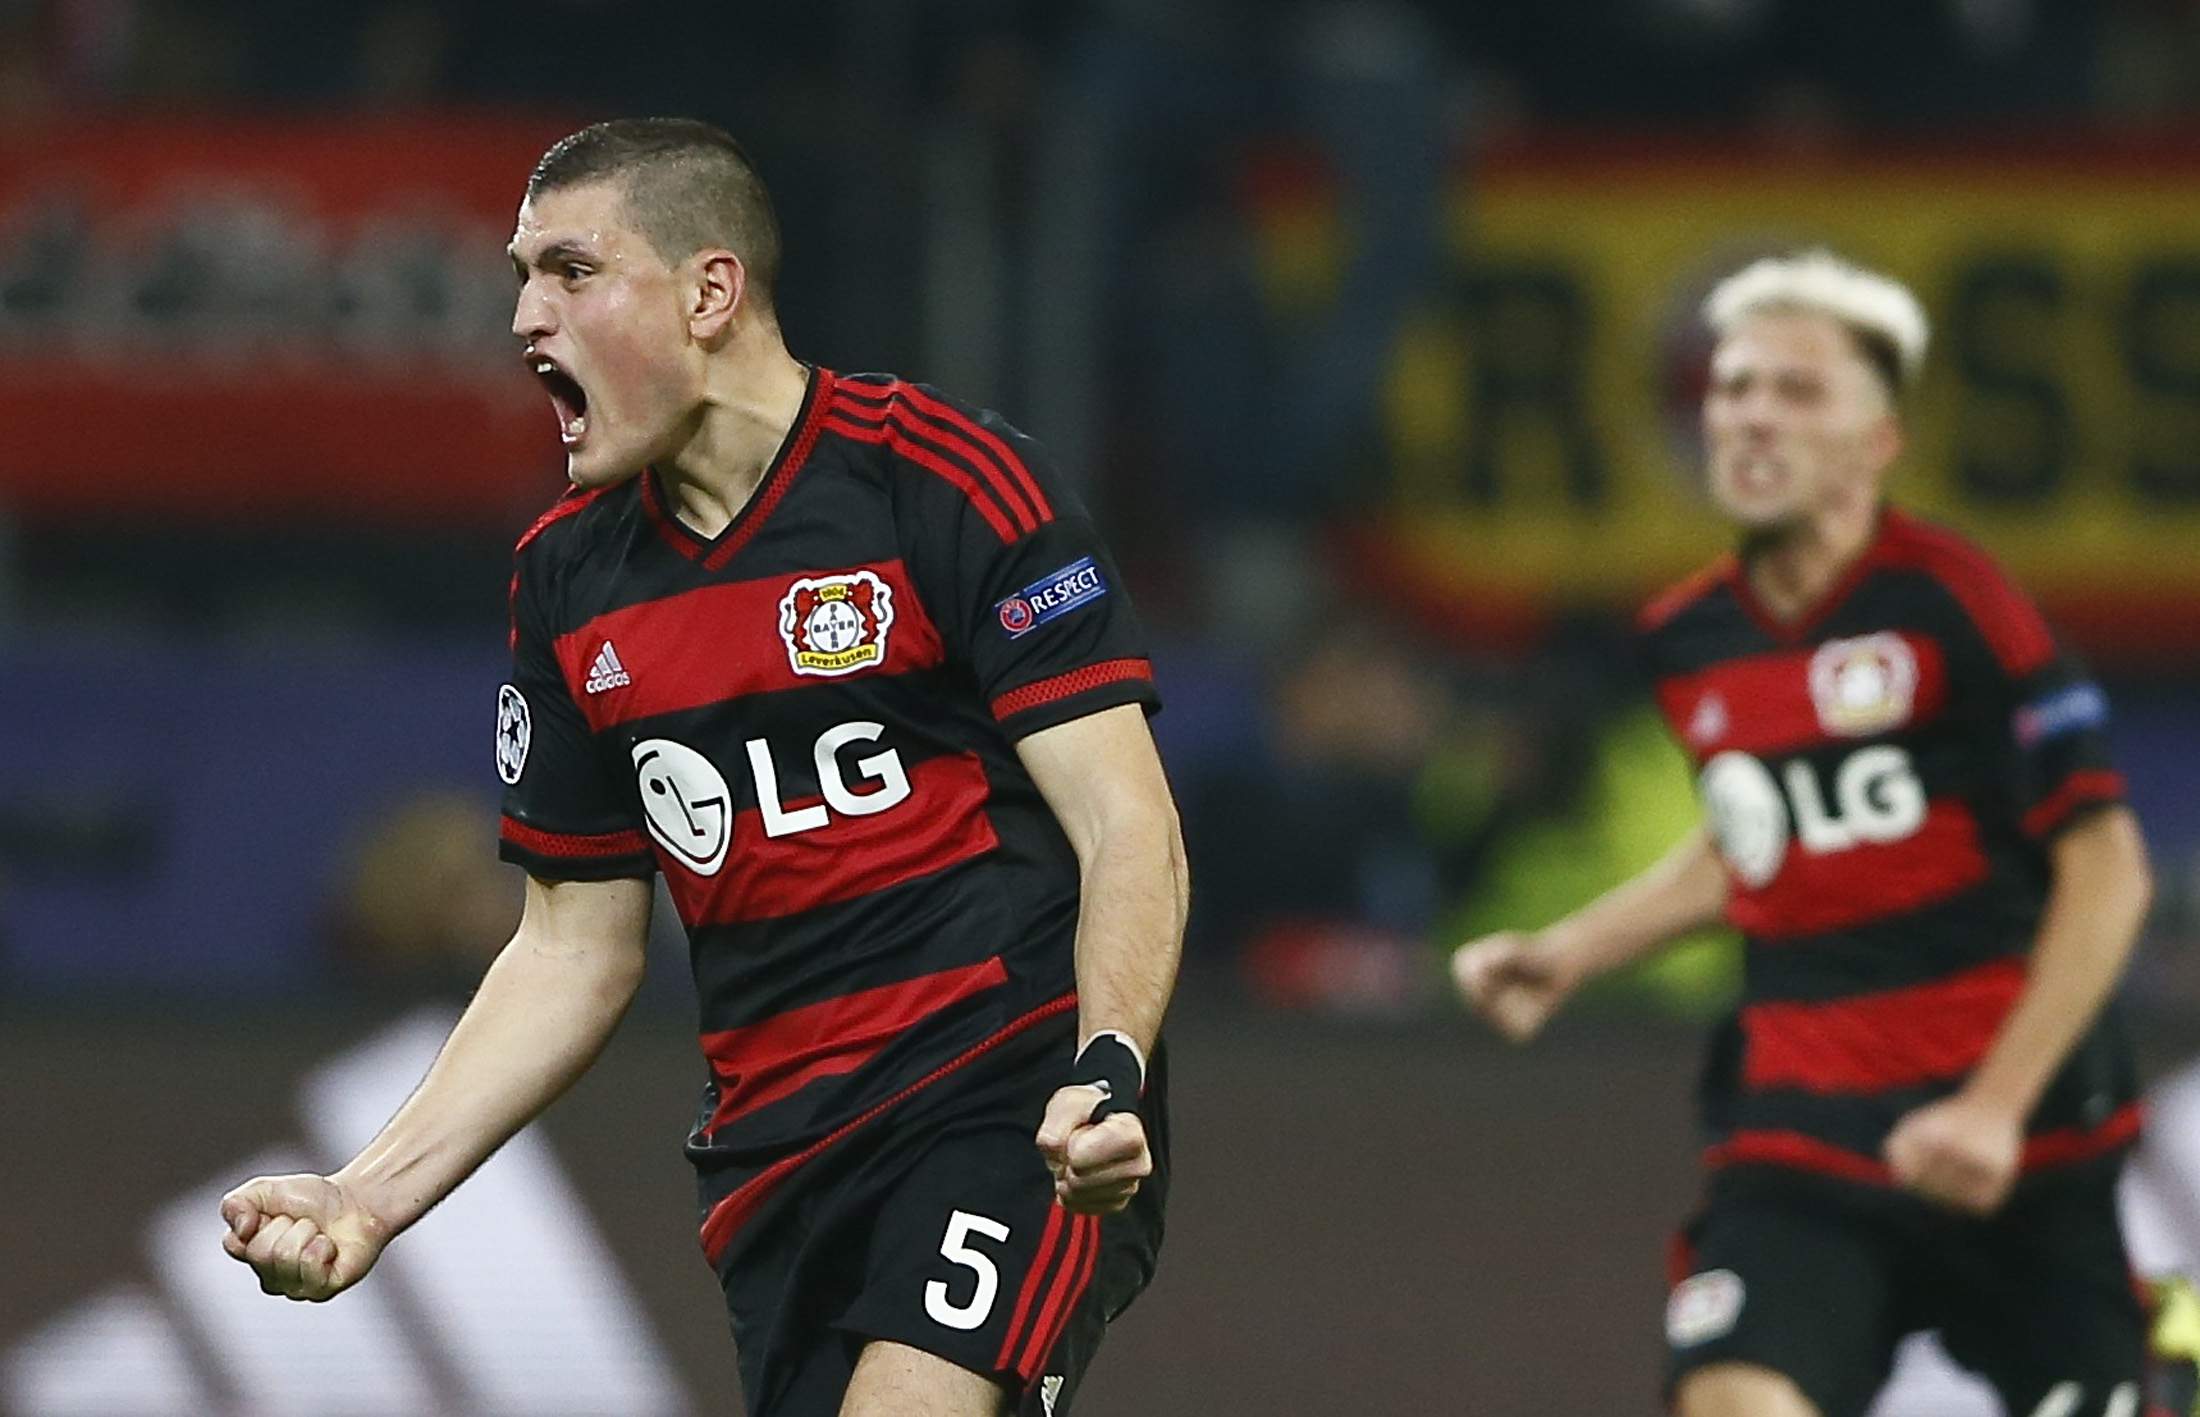 Leverkusen's Kevin Kampl and Kyriakos Papadopoulos (L) react after their teammate Admir Mehmedi (not pictured) scored a goal during their Champions League group E soccer match against Roma in Leverkusen, Germany, October 20, 2015. REUTERS/Wolfgang Rattay